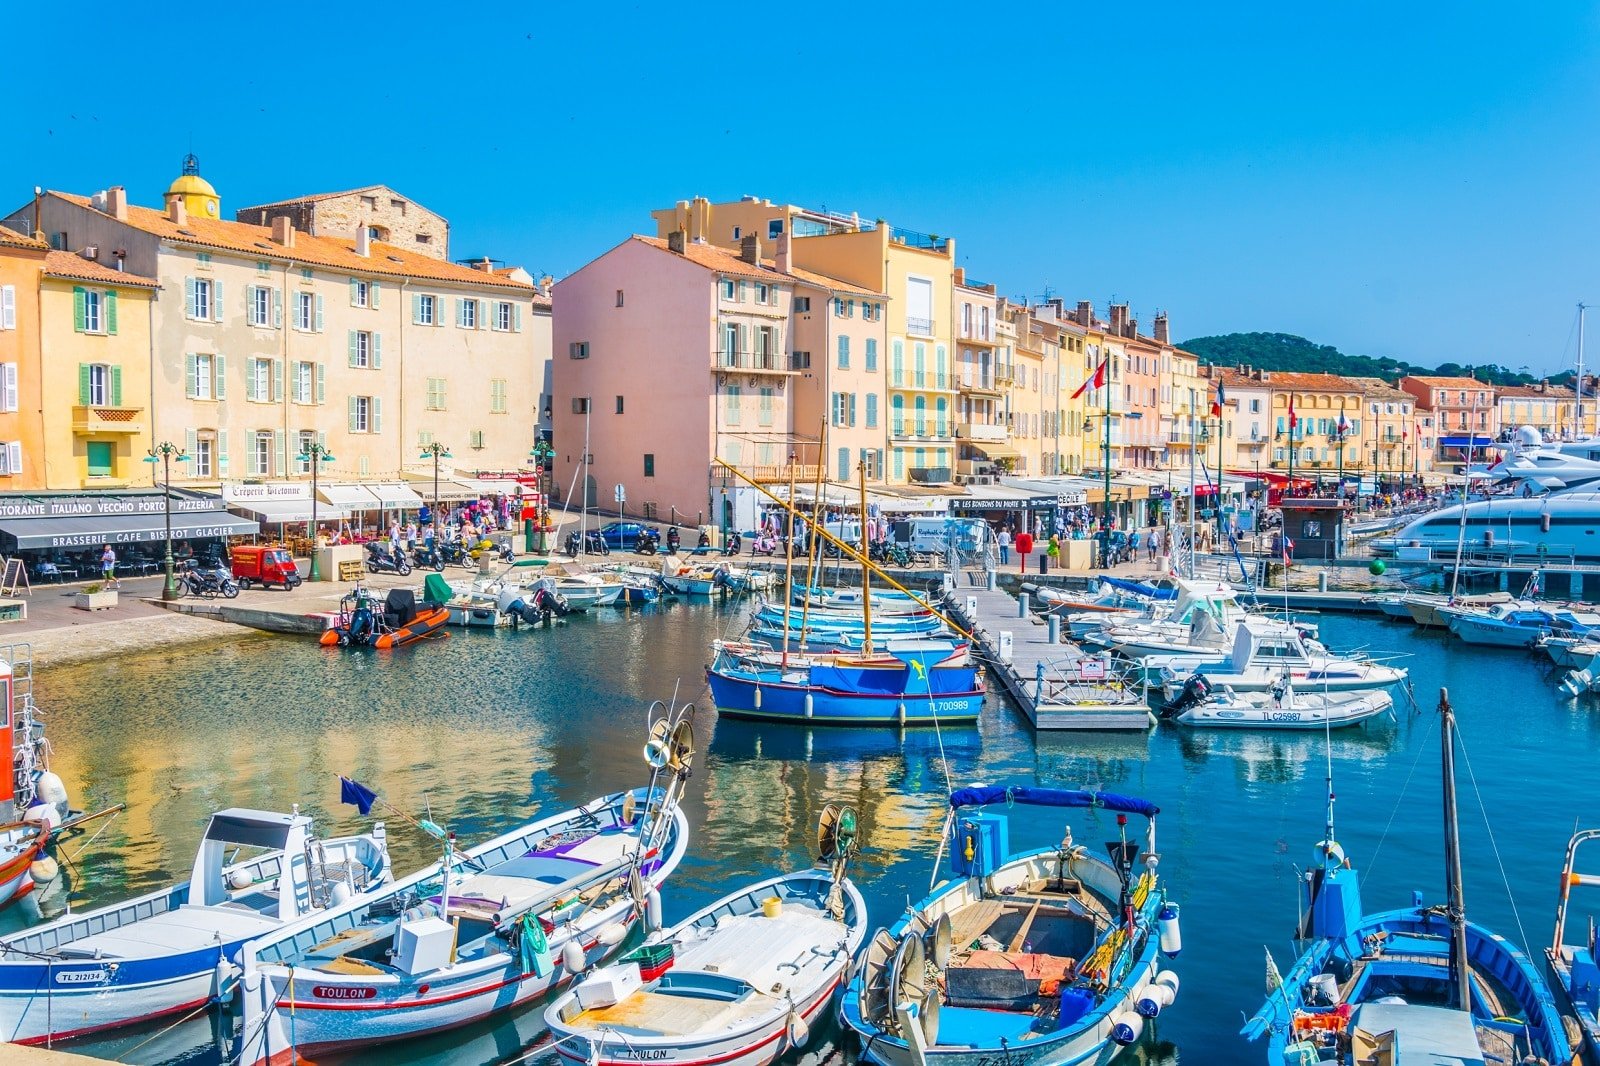 <p><span>Saint Tropez, a glamorous destination on the French Riviera, offers a sophisticated setting for sailing beginners. The Mediterranean Sea’s mild conditions are perfect for learning. Sailing schools in Saint Tropez combine luxury with practical sailing instruction.</span></p> <p><b>Insider’s Tip: </b><span>Experience the glitz of Saint Tropez by visiting its famous beaches and restaurants.</span></p> <p><b>When to Travel: </b><span>Late spring to early autumn for ideal sailing weather.</span></p> <p><b>How to Get There: </b><span>Fly to Nice Côte d’Azur Airport and drive to Saint Tropez.</span></p>